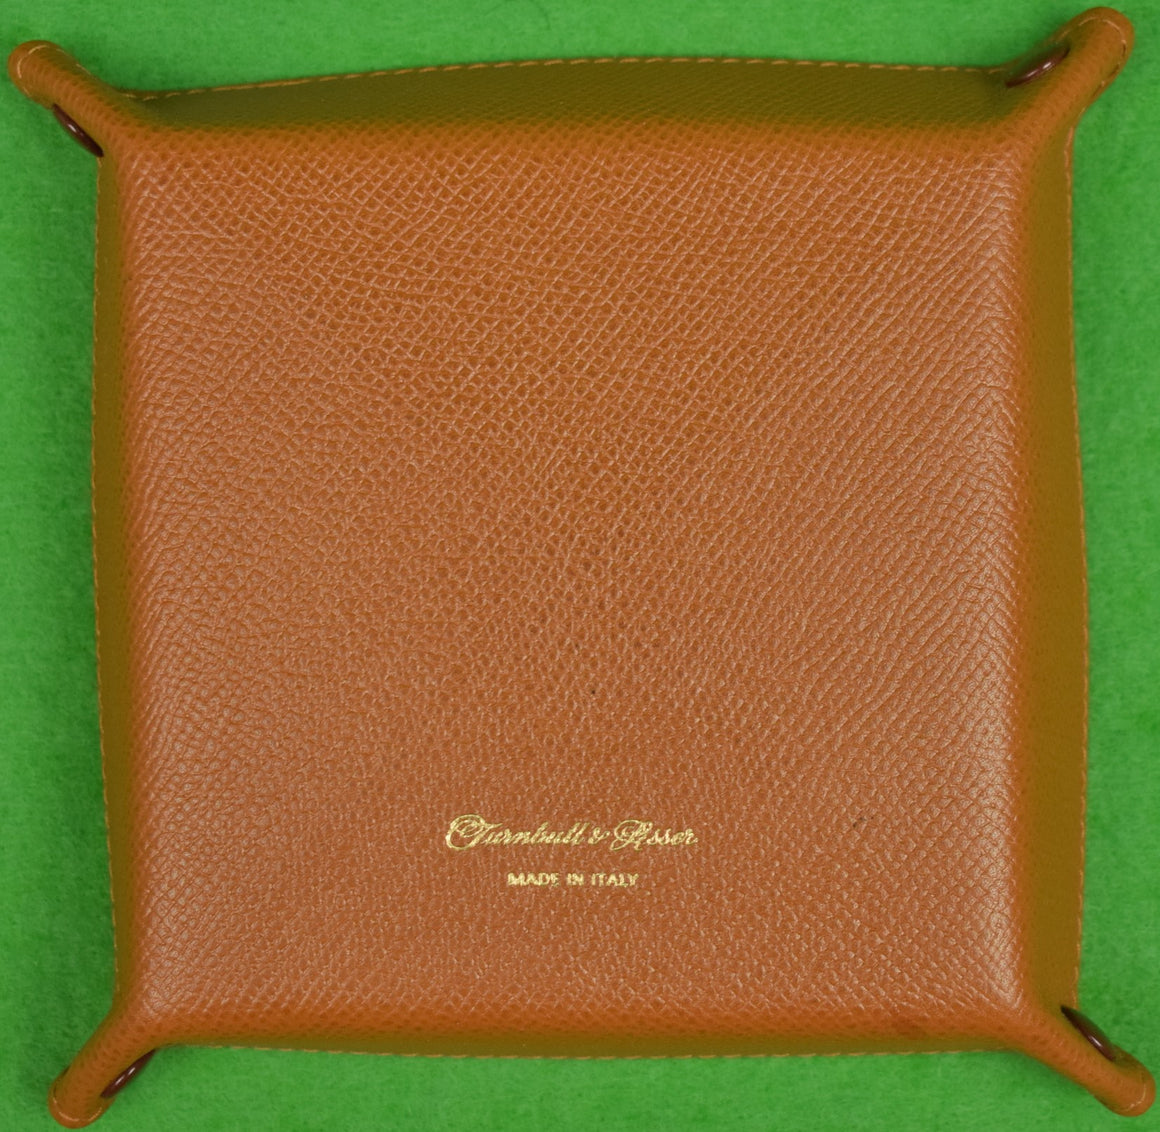 "Turnbull & Asser Leather Travel/ Cufflink Tray" (SOLD)